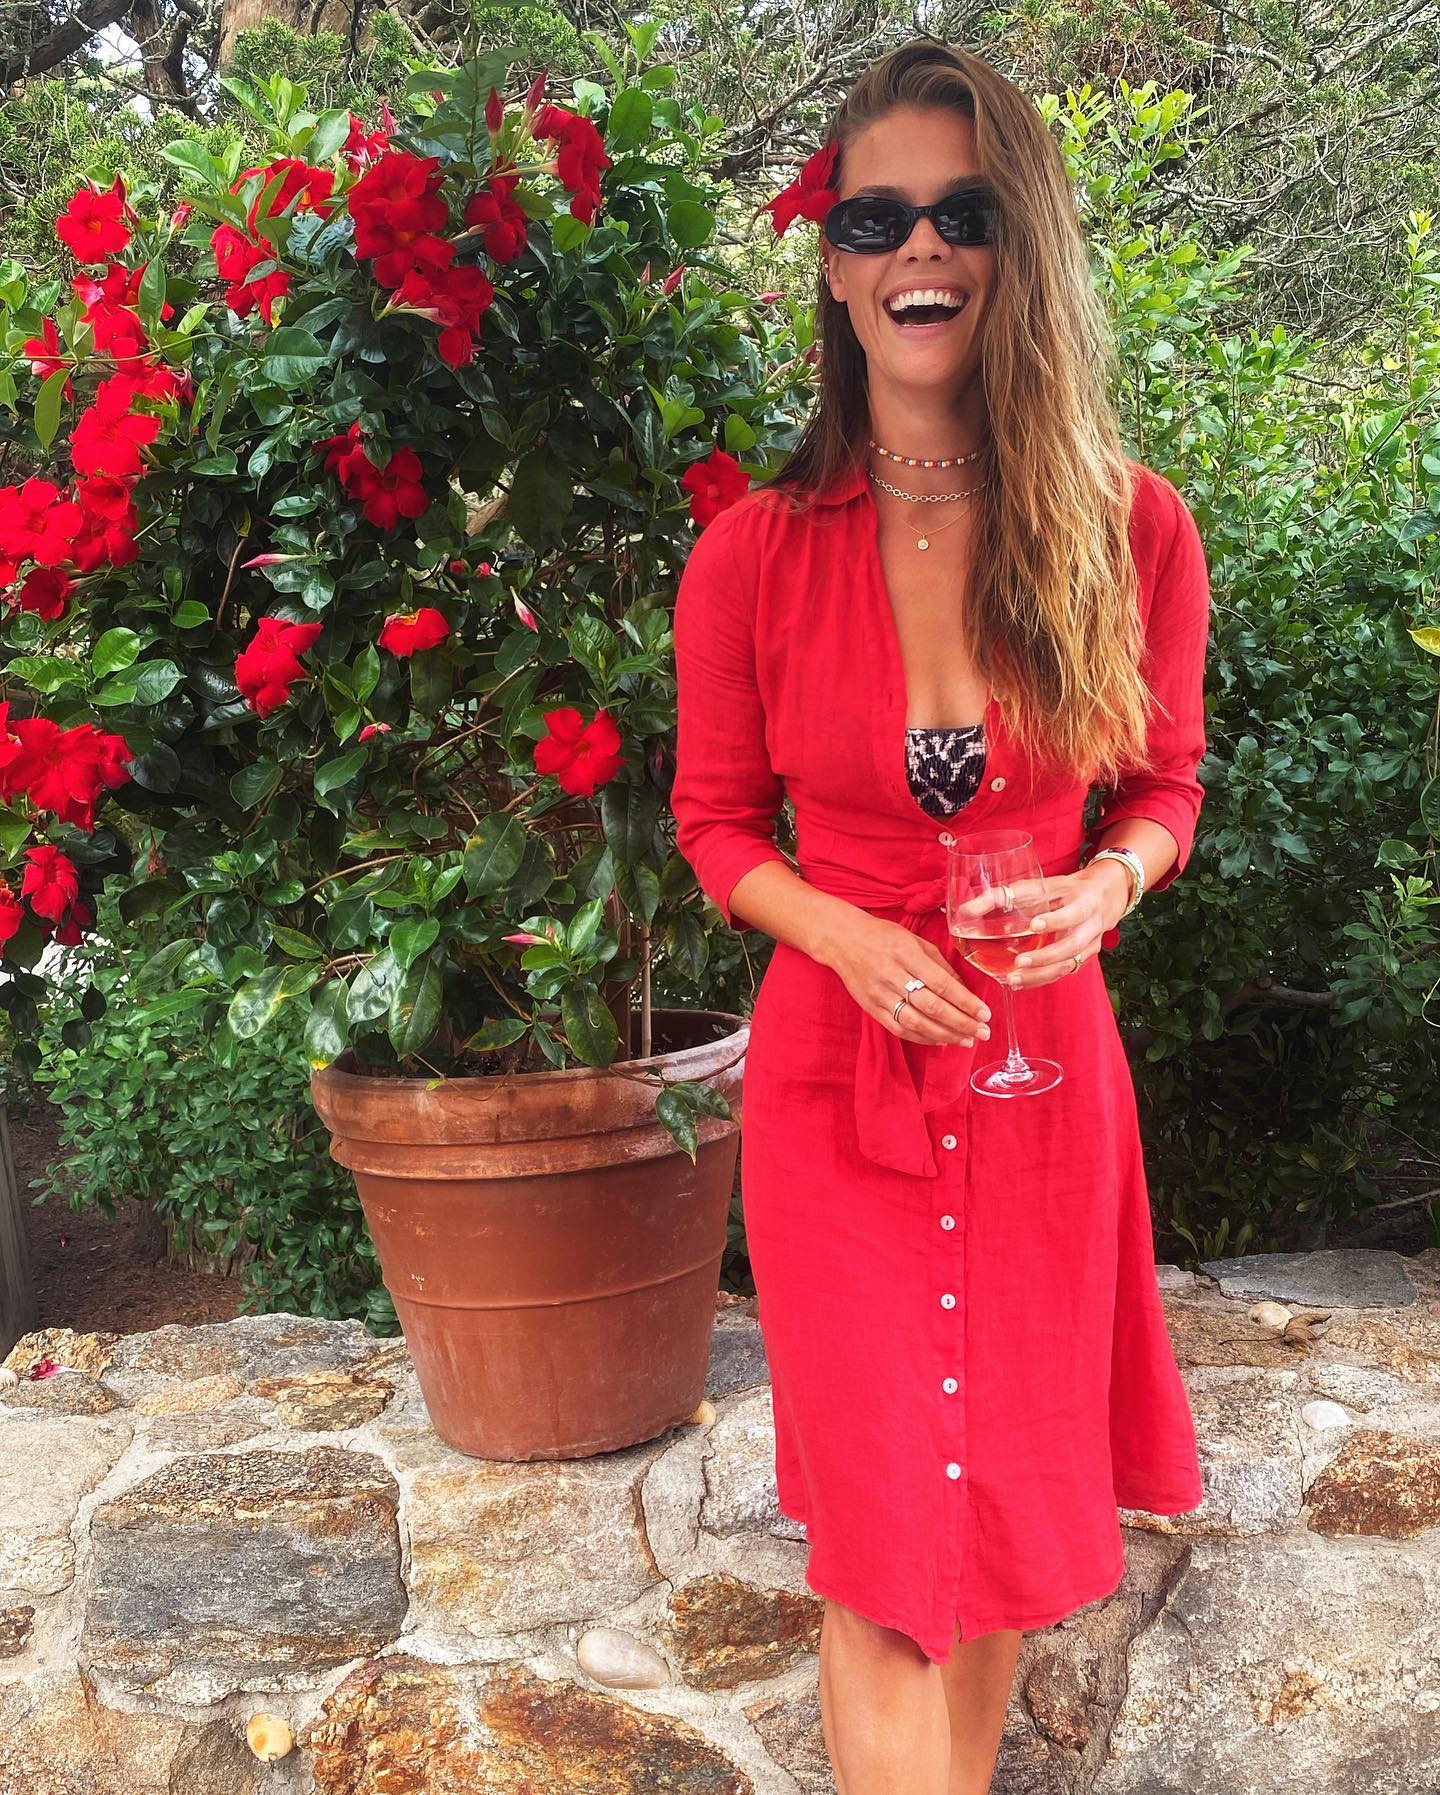 Photos n°2 : Nina Agdal is The Lady in Red!